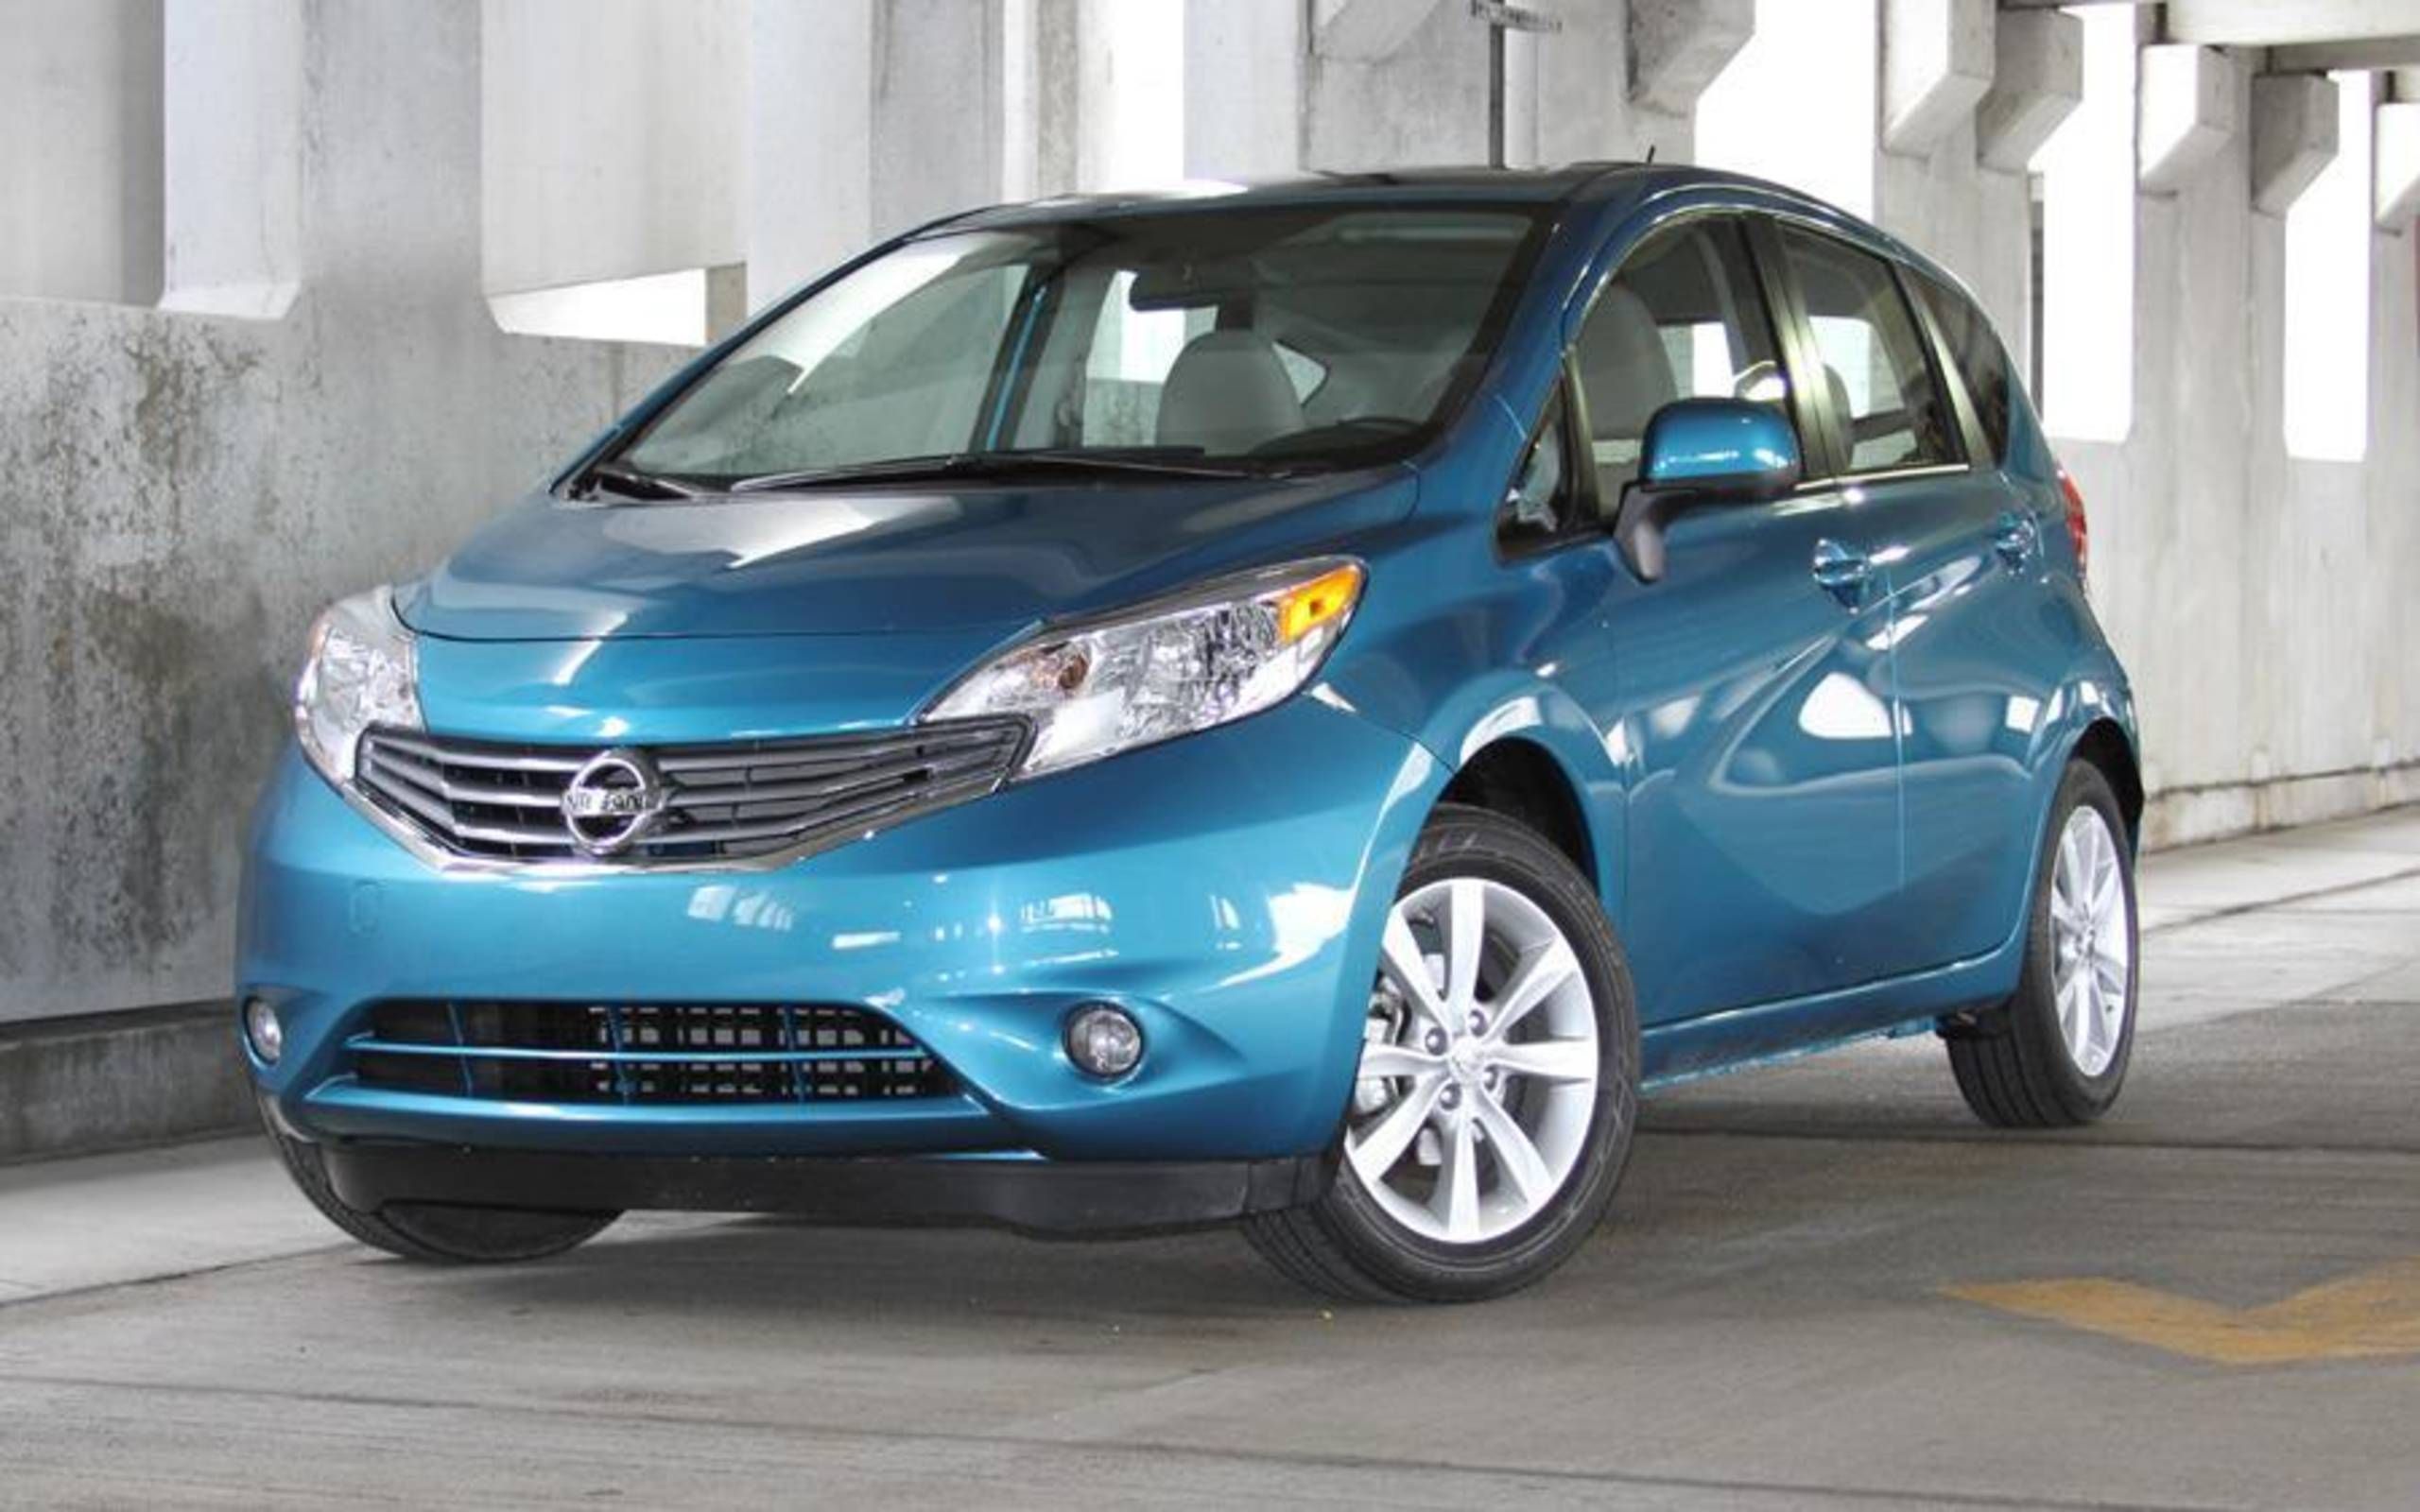 2014 Nissan Versa Note SV review notes